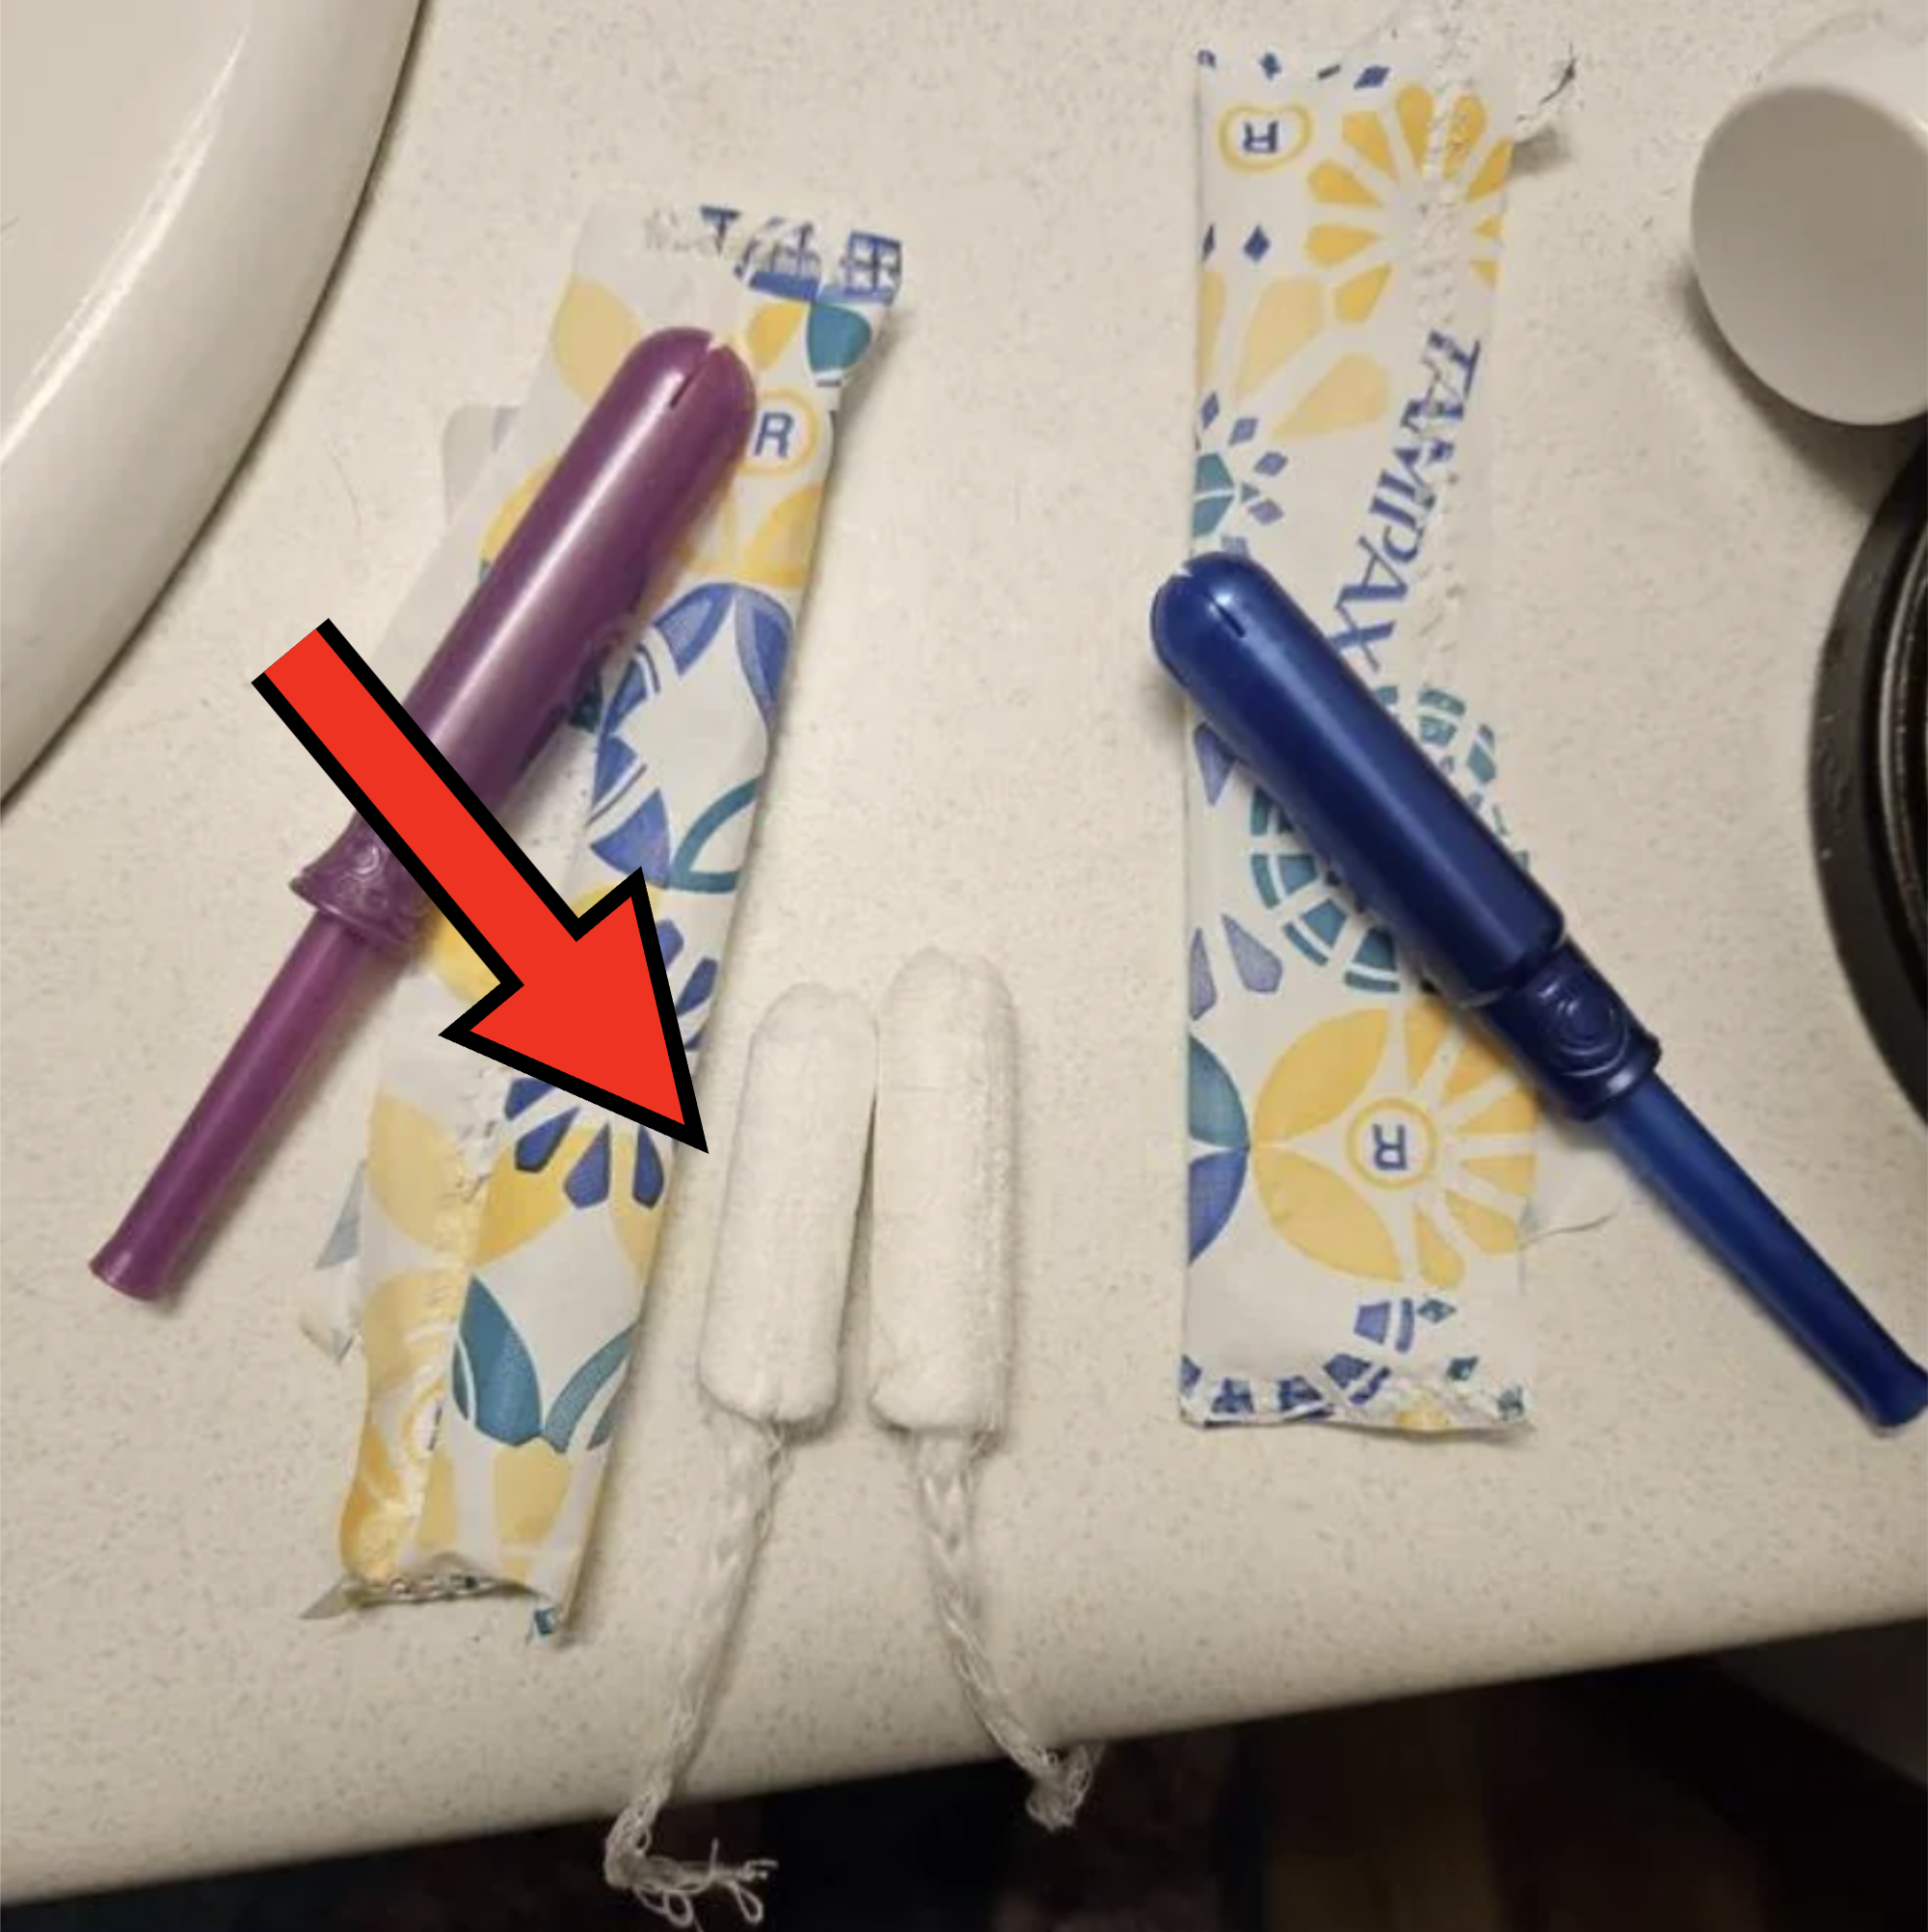 Two tampons with applicators next to two unwrapped tampons on a patterned surface